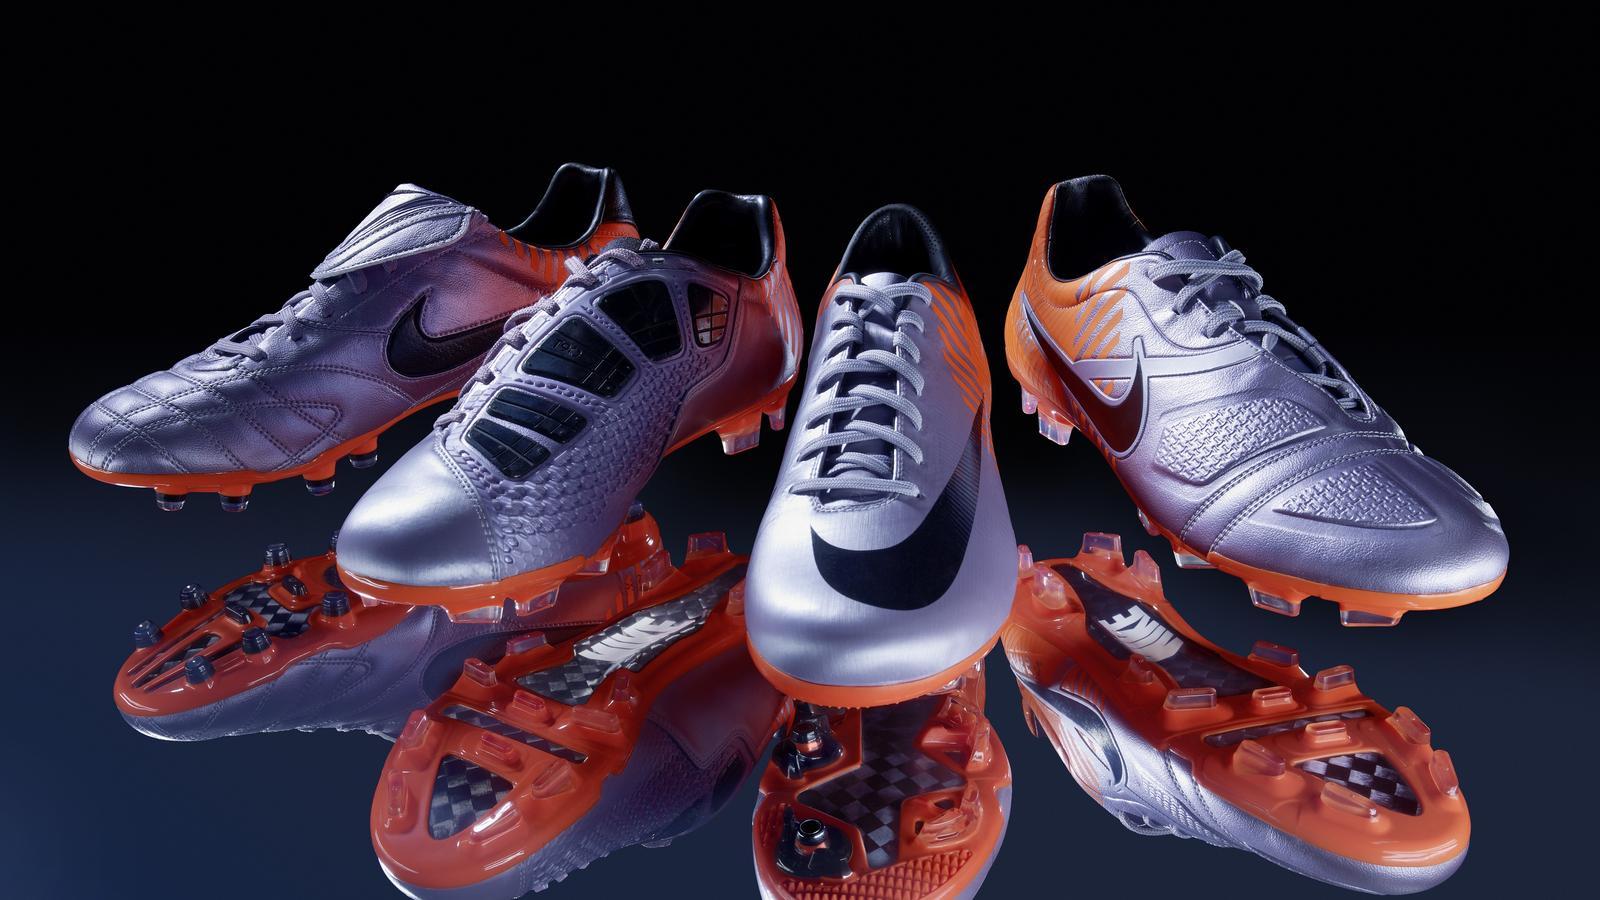 Elite Series Football Boots Unveiled